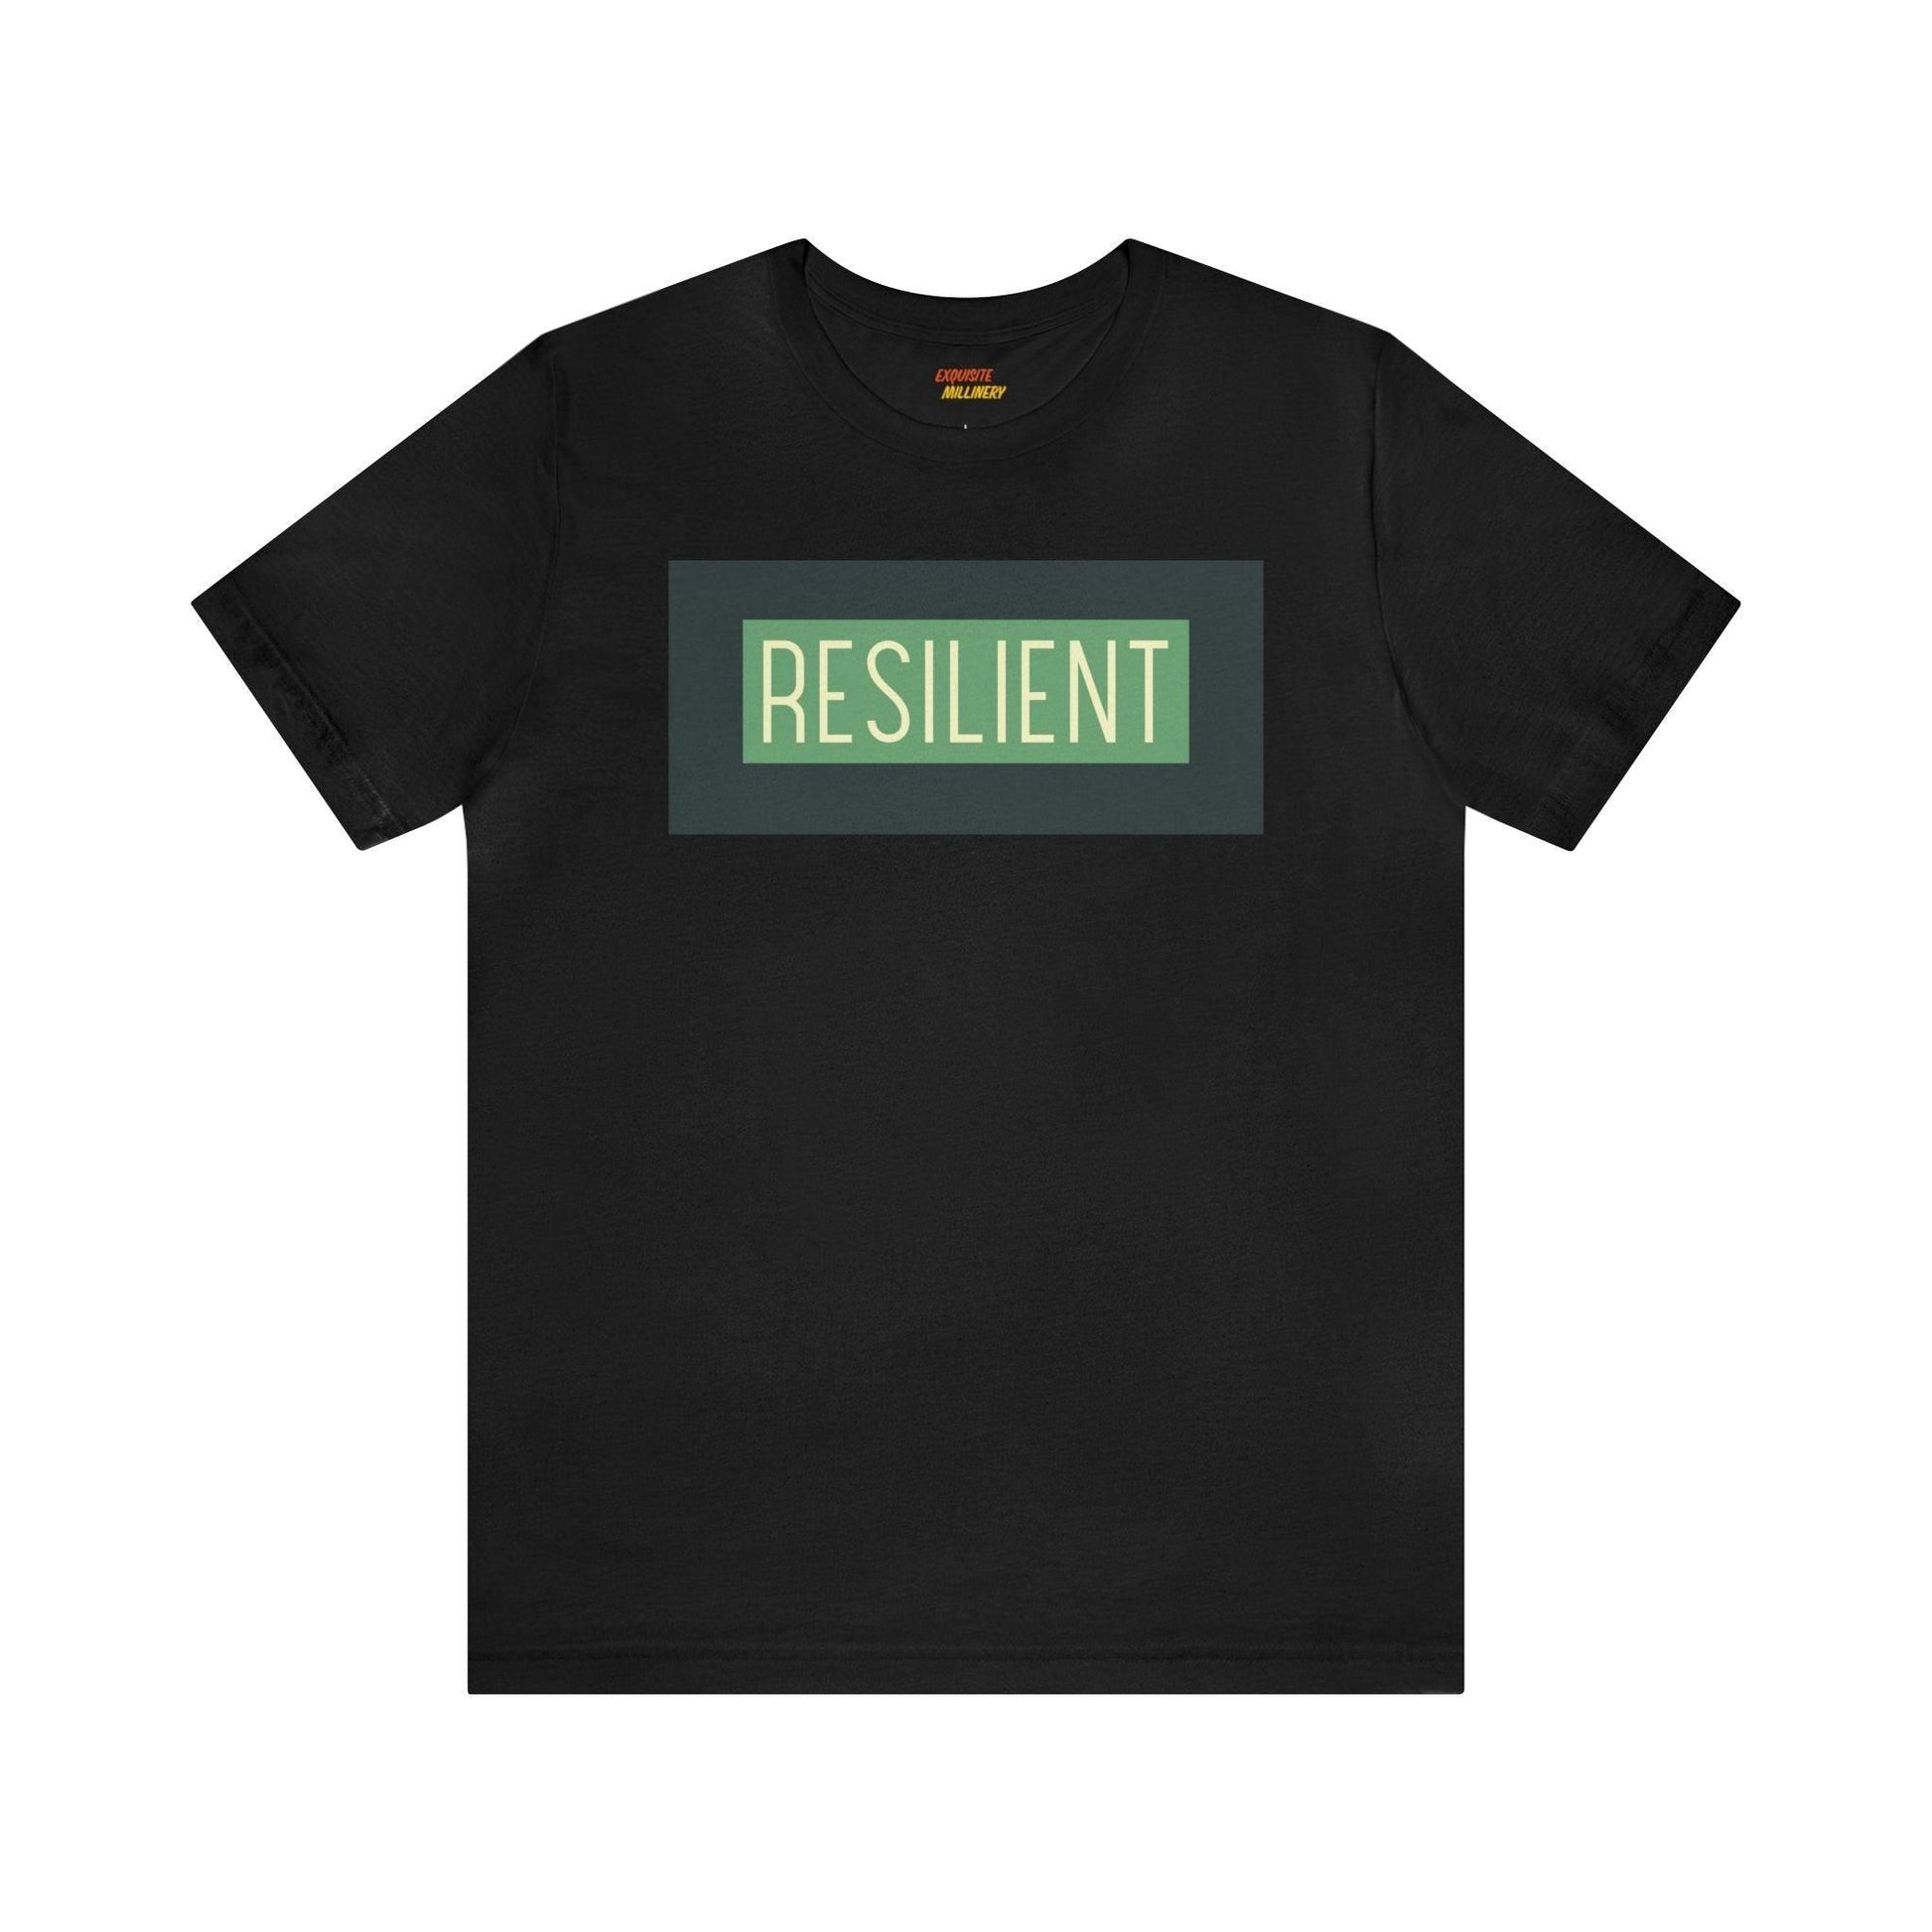 Resilient Unisex Tee T-Shirt   